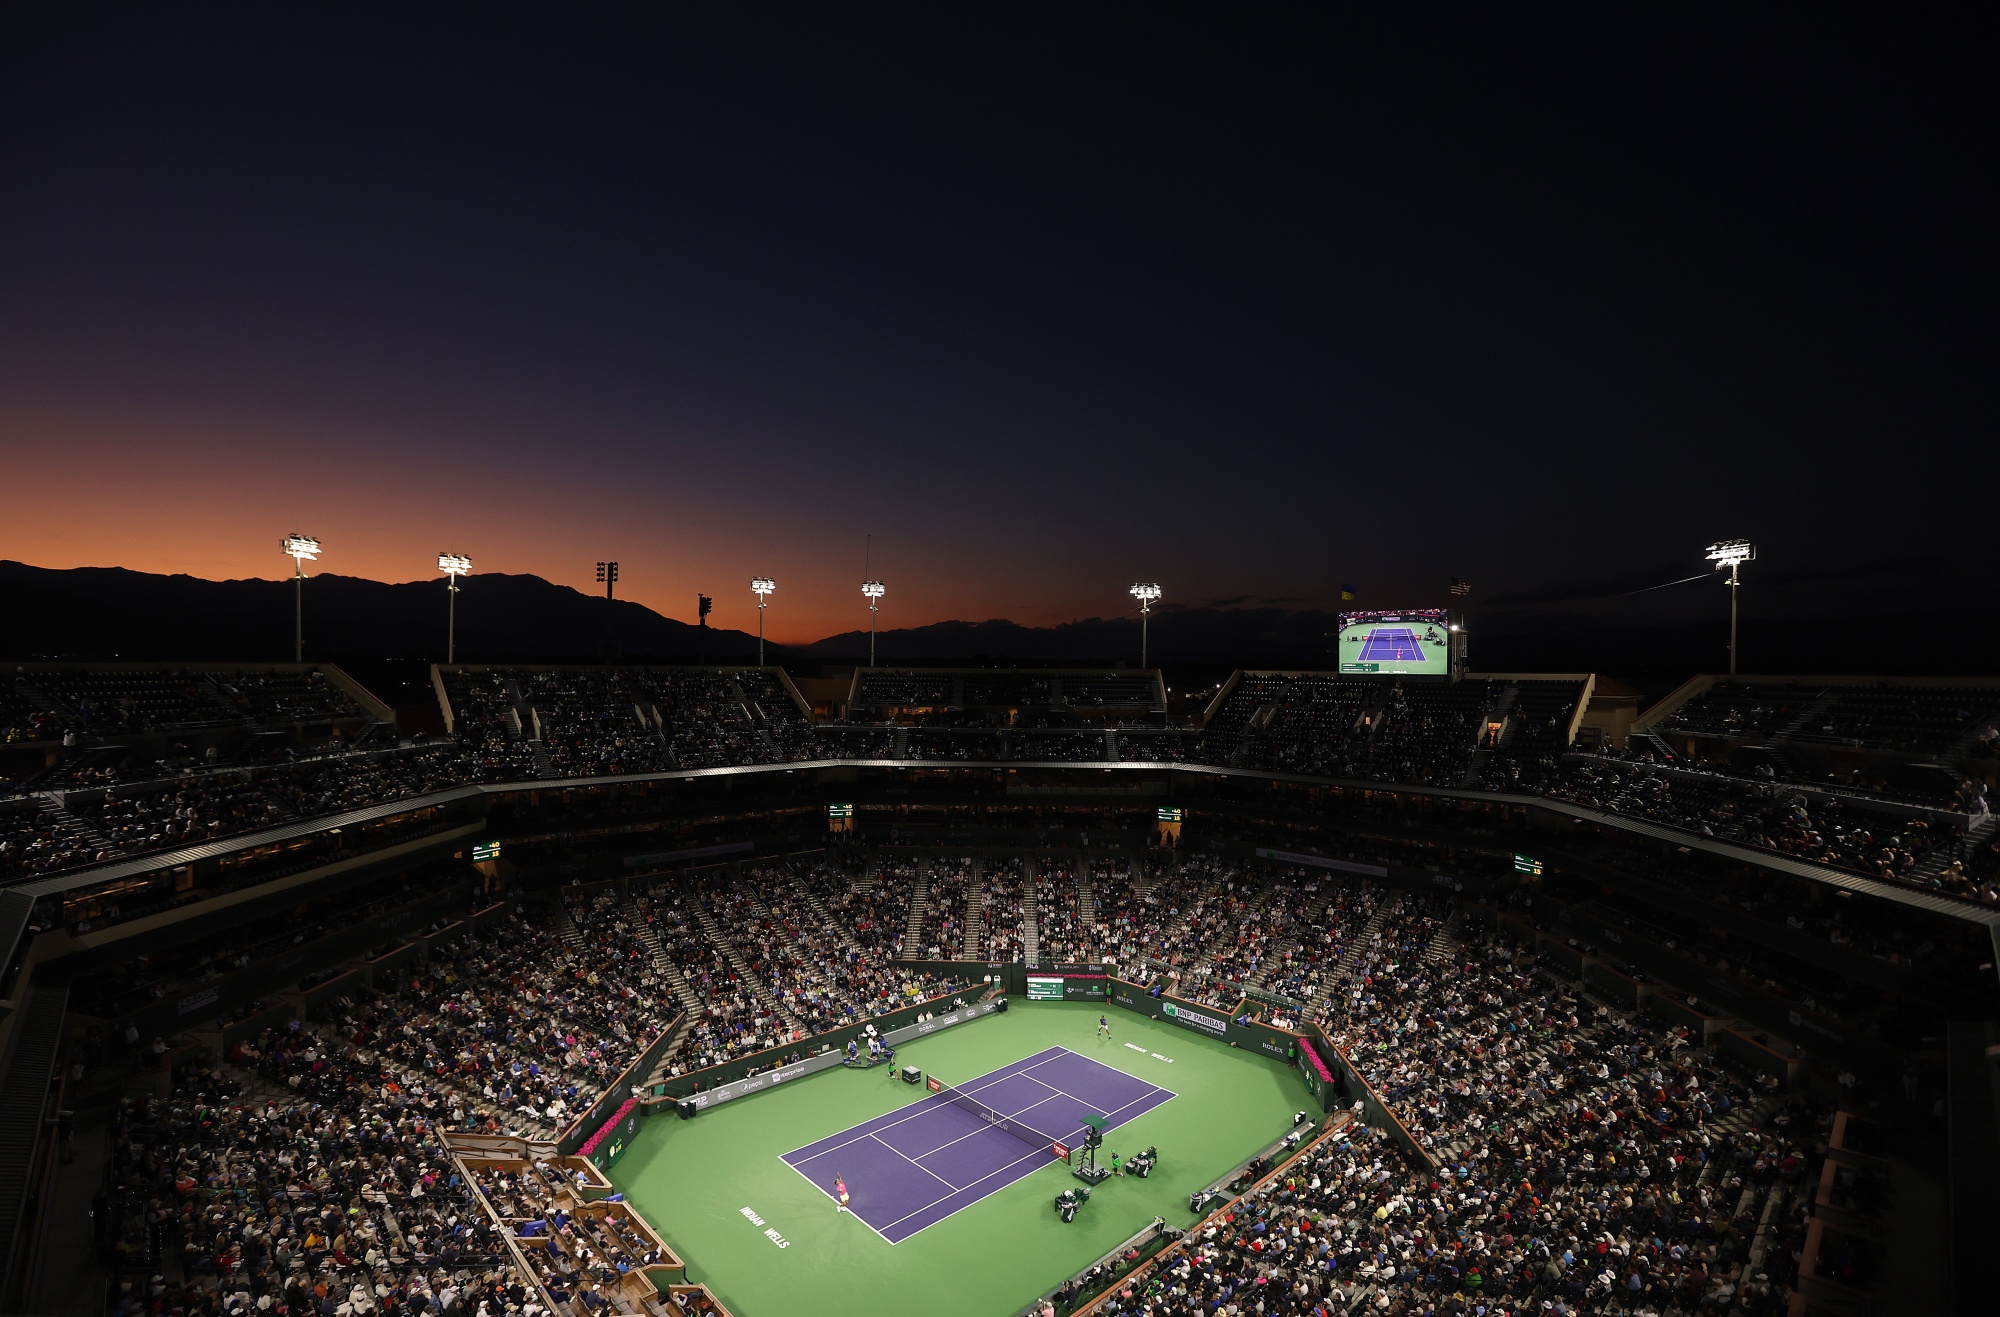 Larry Ellison-Owned Indian Wells Is Spring Break for Adults